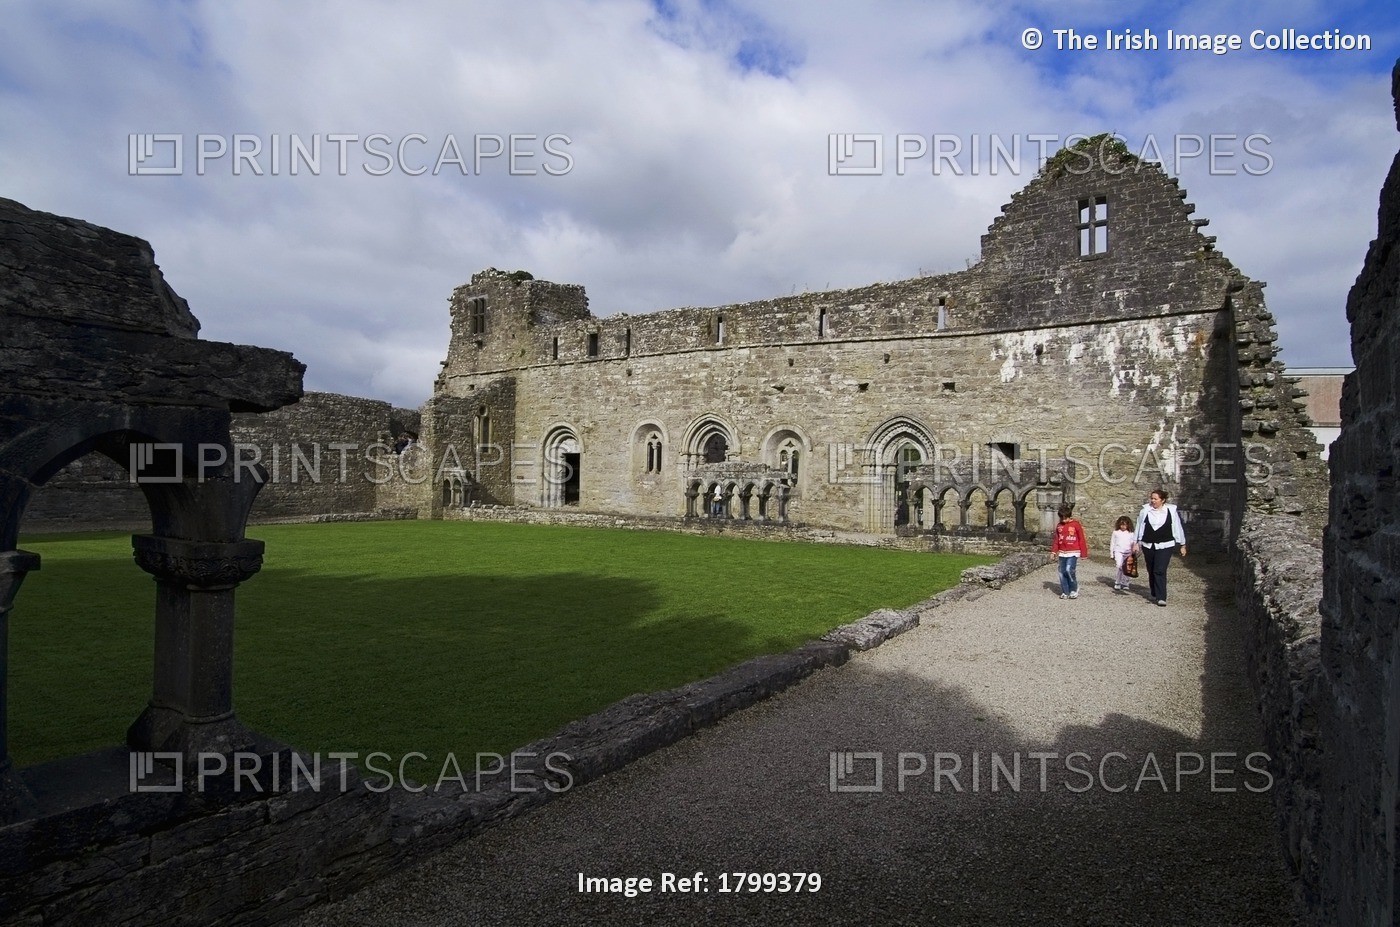 Cong Abbey, On The Border Of Co. Mayo And Co. Galway, Ireland